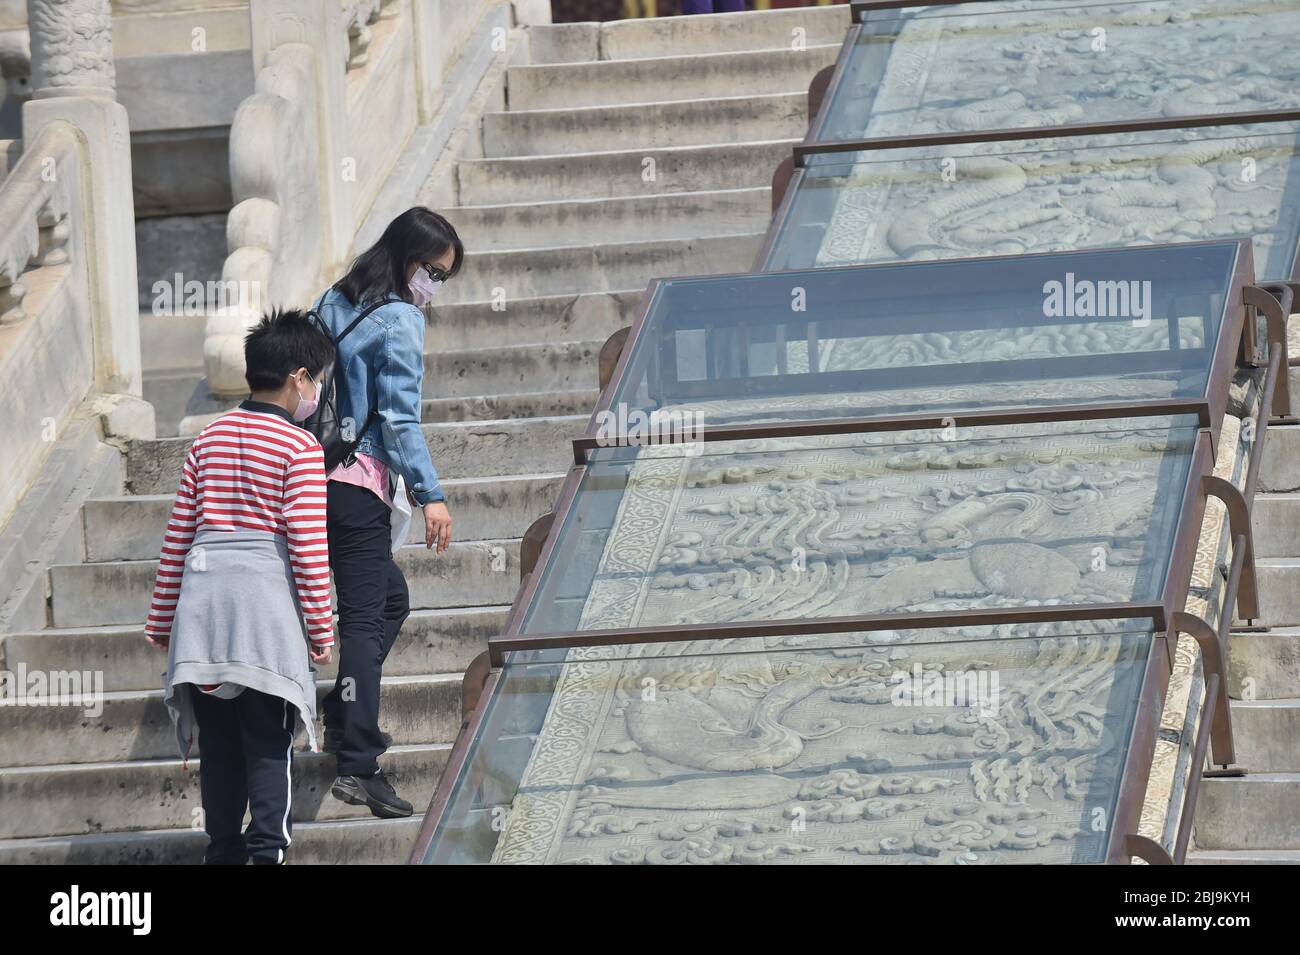 Beijing, China. 29th Apr, 2020. Tourists visit the Hall of Prayer for Good Harvests at the Temple of Heaven in Beijing, capital of China, April 29, 2020. The Temple of Heaven, a UNESCO World Heritage Site temporarily closed due to the COVID-19 outbreak, reopened its three main building groups to the public on Wednesday. The reopened grounds, namely the Hall of Prayer for Good Harvest, the Imperial Vault of Heaven and the Circular Mound Altar, can be accessed by a limited number of visitors via online booking. Credit: Peng Ziyang/Xinhua/Alamy Live News Stock Photo